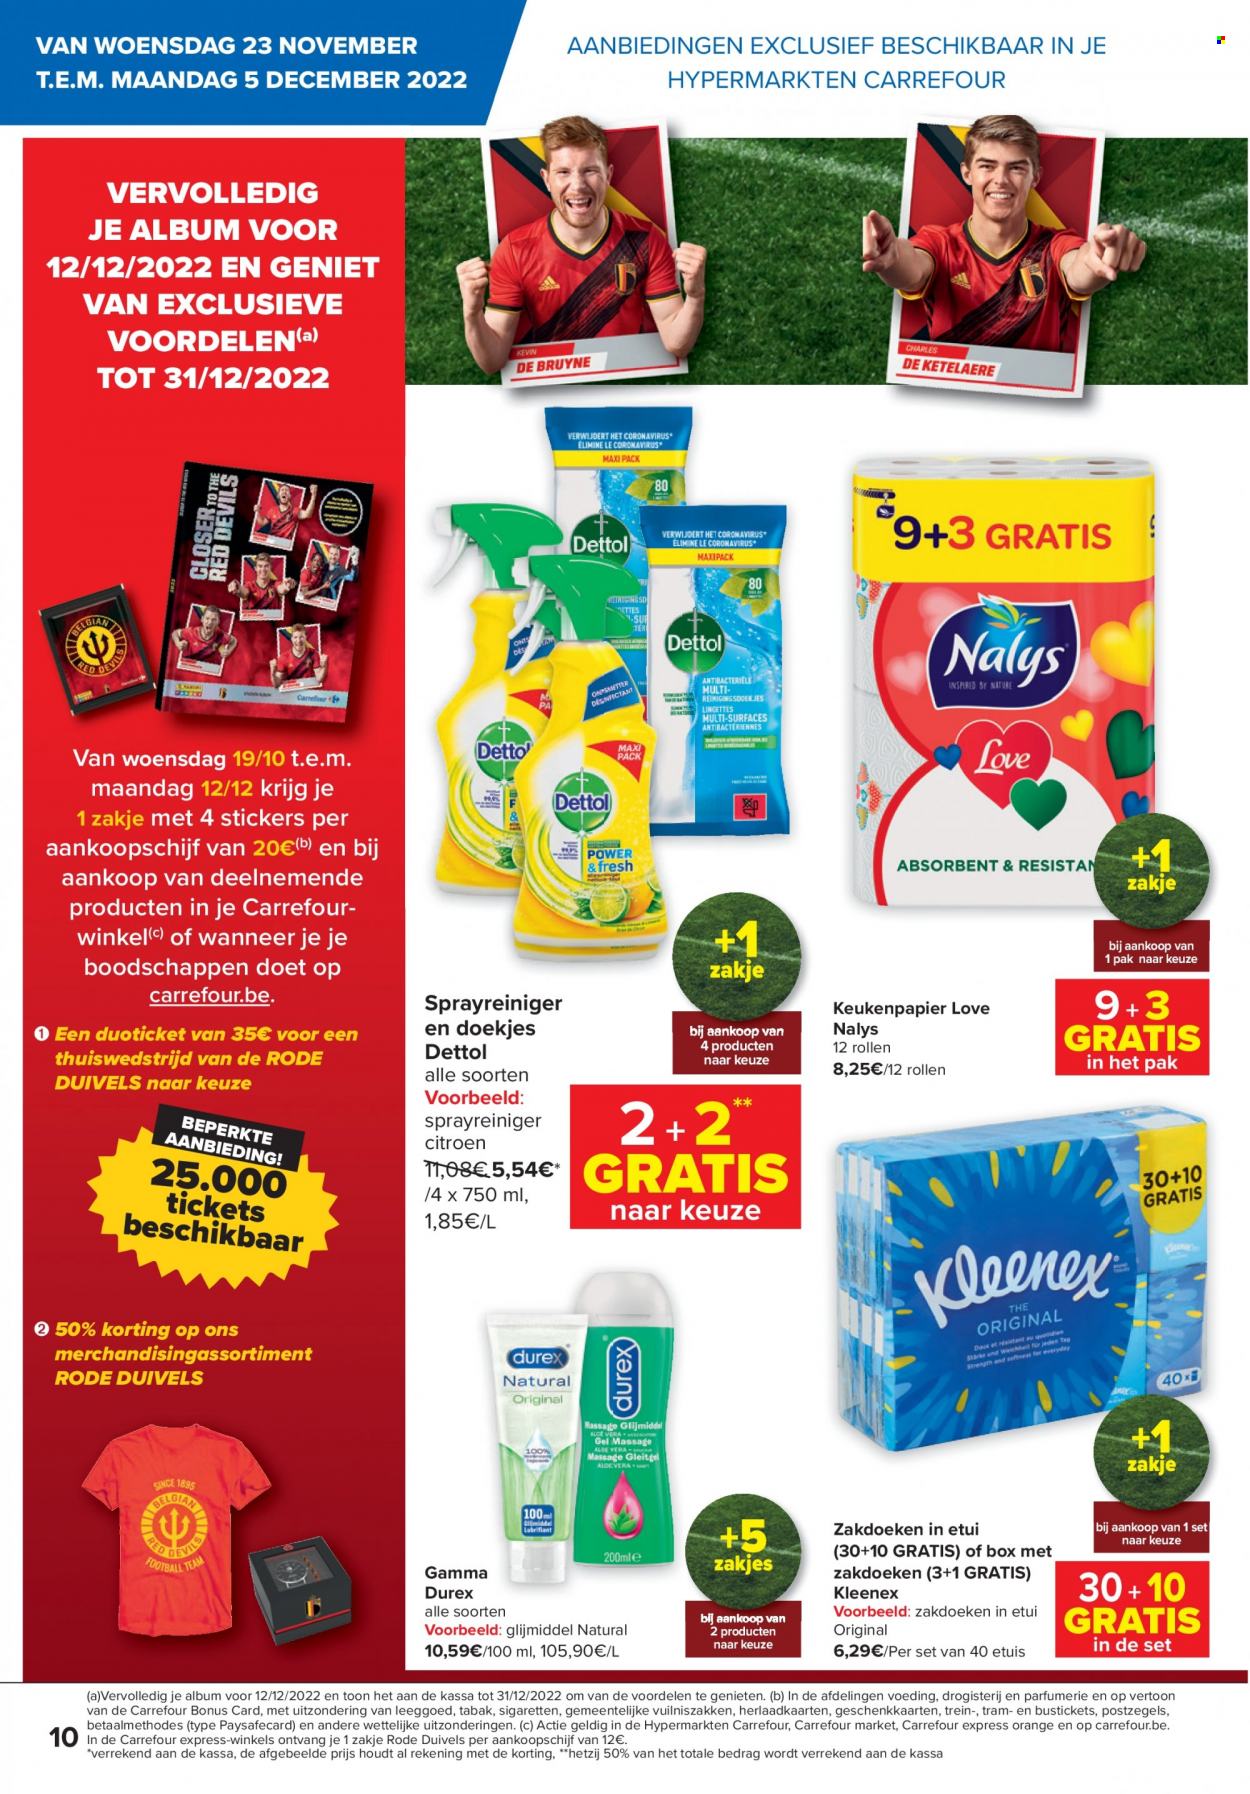 Catalogue Carrefour hypermarkt - 23.11.2022 - 5.12.2022. Page 10.